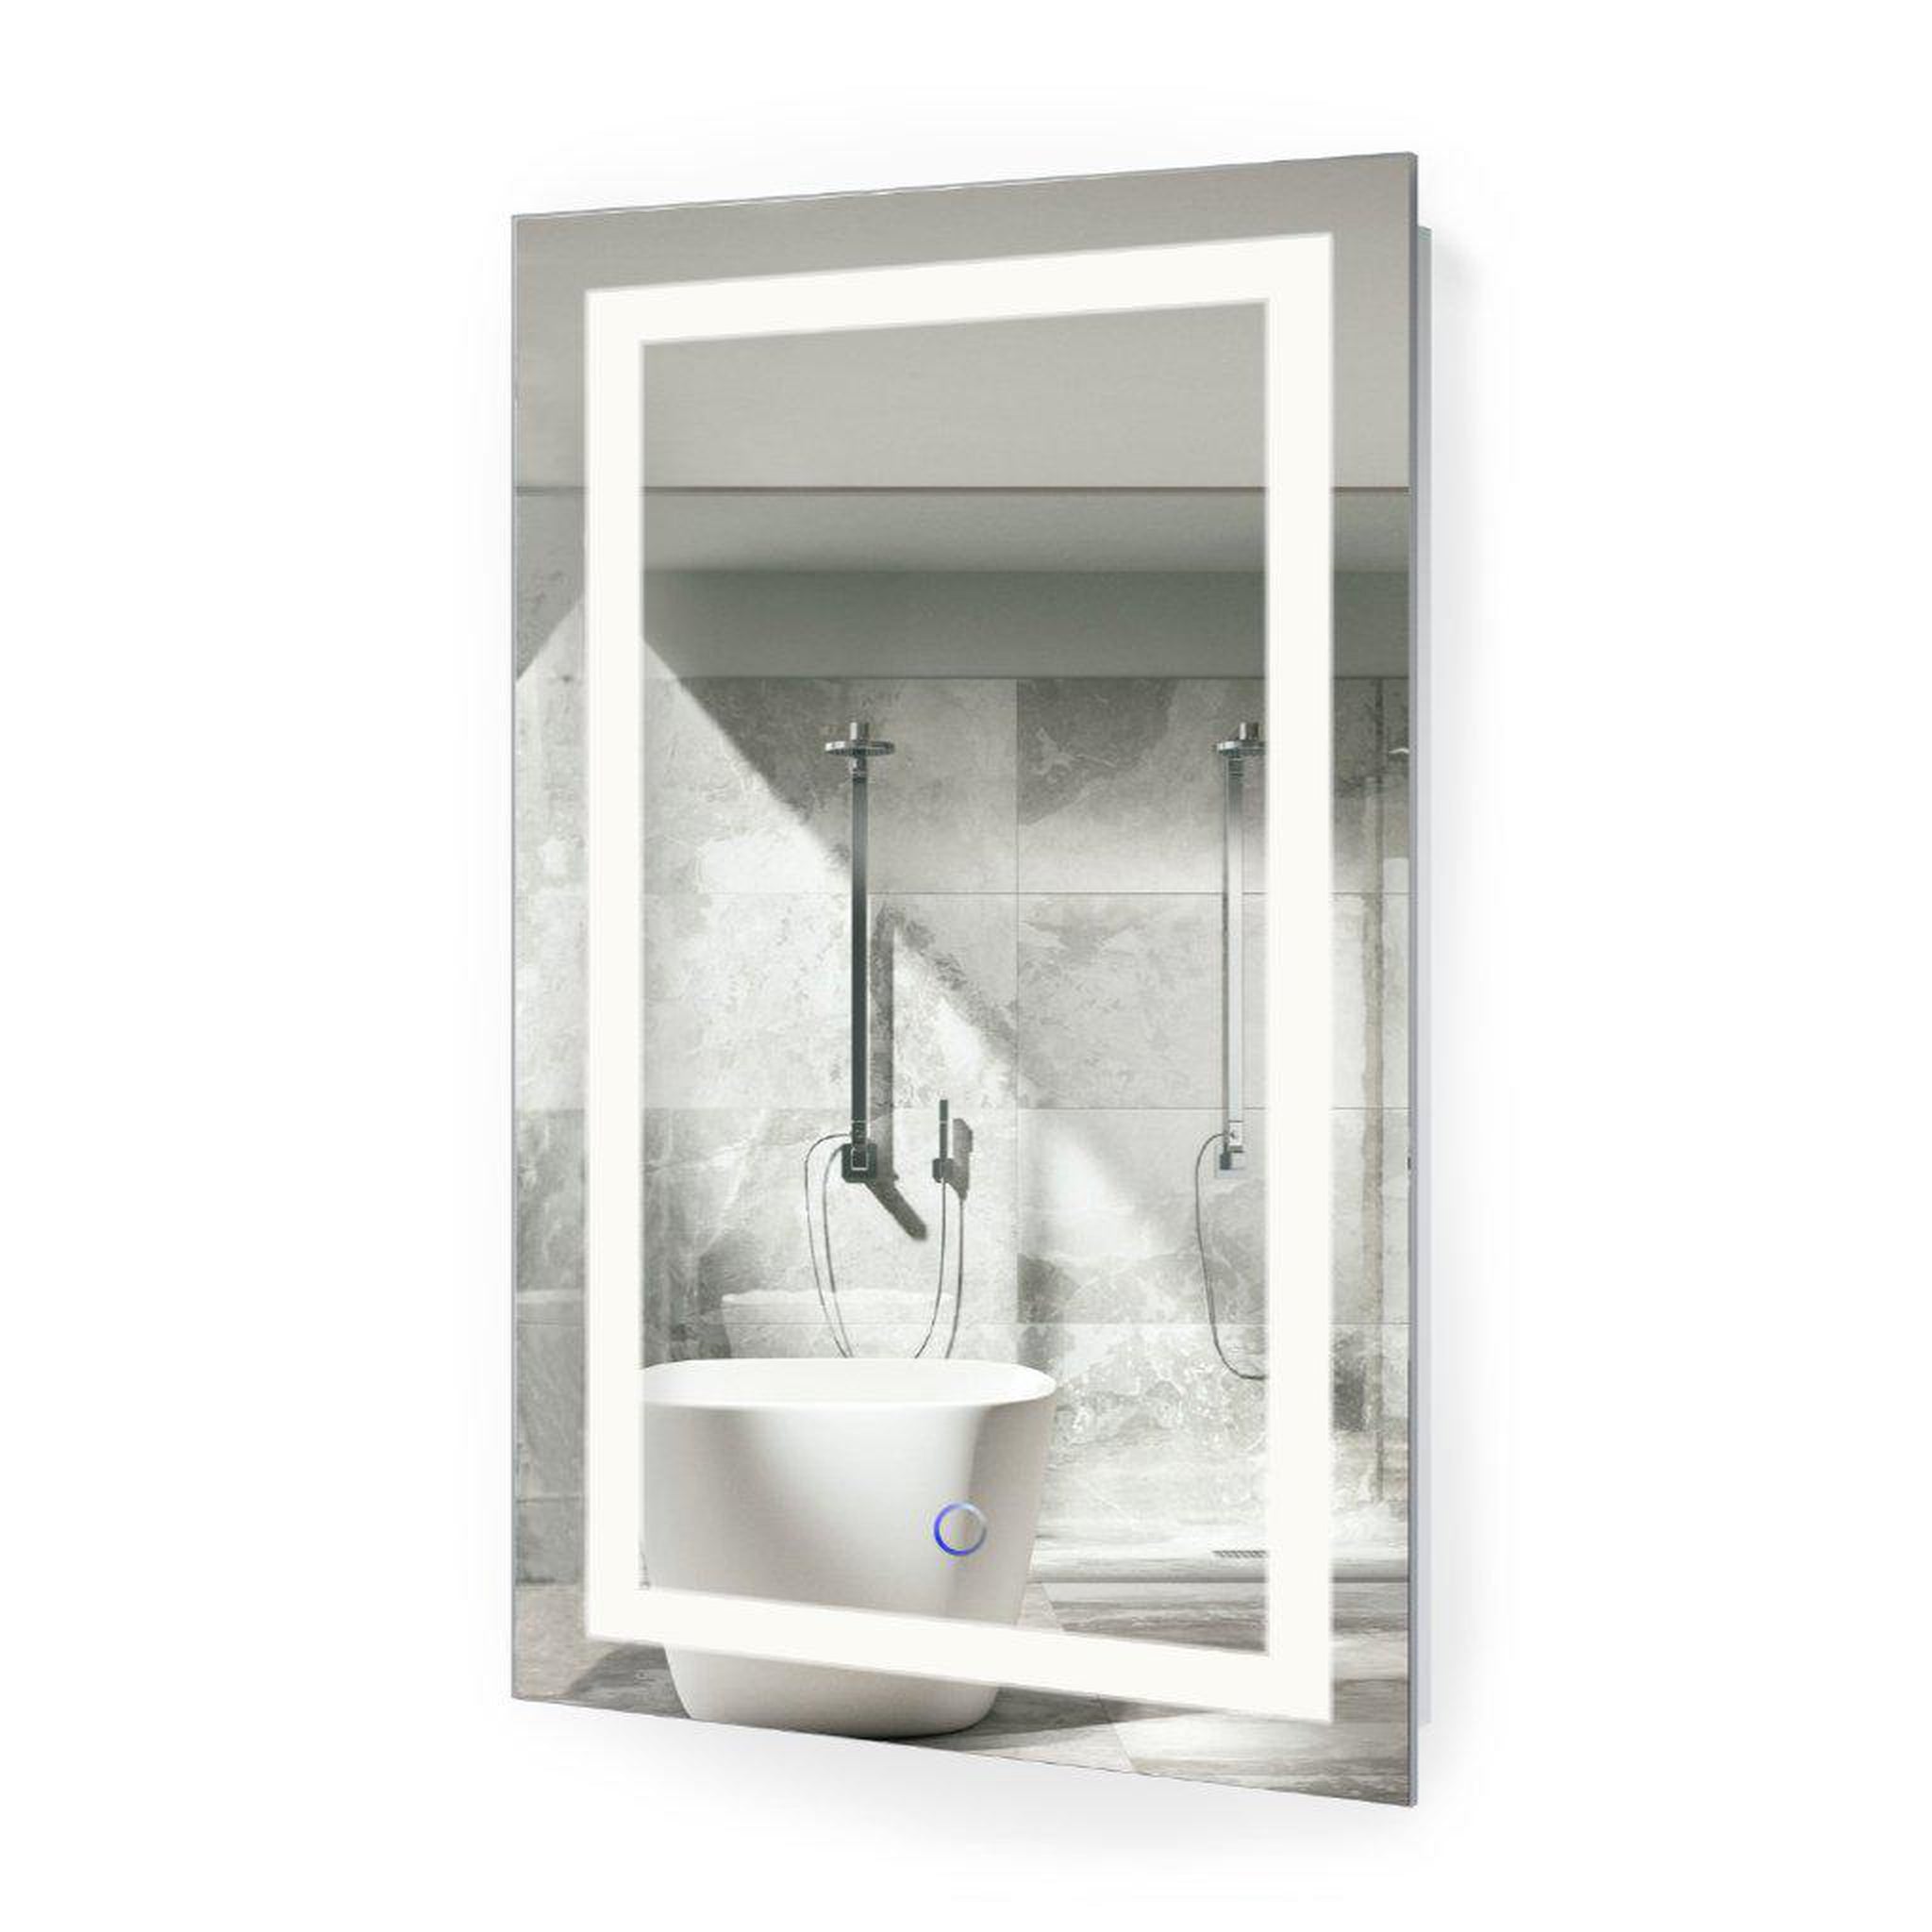 Krugg Reflections, Krugg Reflections Icon 30" x 18" 5000K Rectangular Wall-Mounted Illuminated Silver Backed LED Mirror With Built-in Defogger and Touch Sensor On/Off Built-in Dimmer